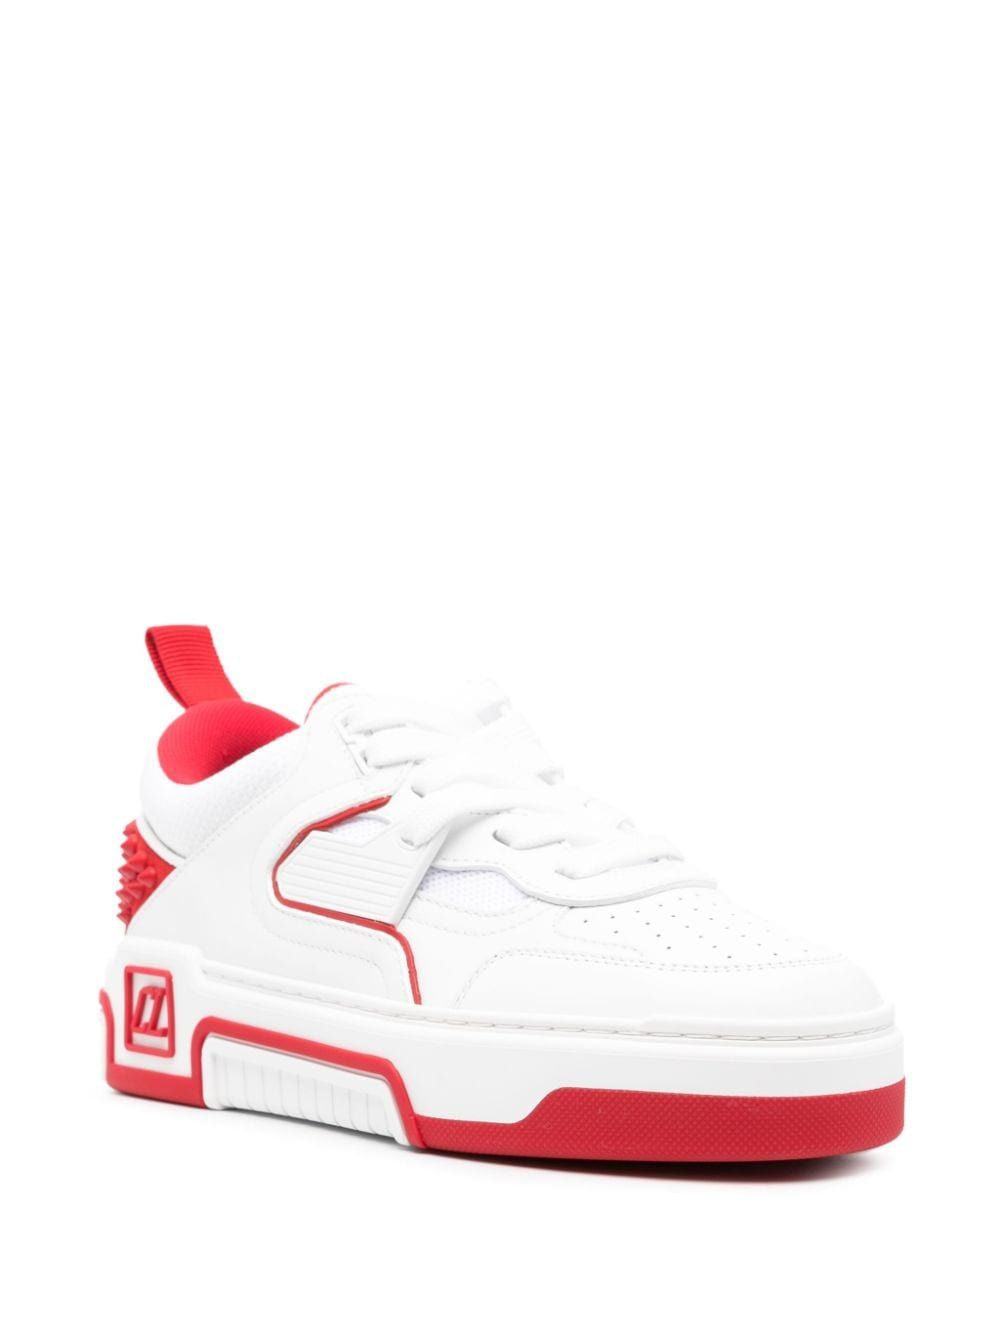 CHRISTIAN LOUBOUTIN White Leather Sneaker with Spikes and CL Monogram for Women